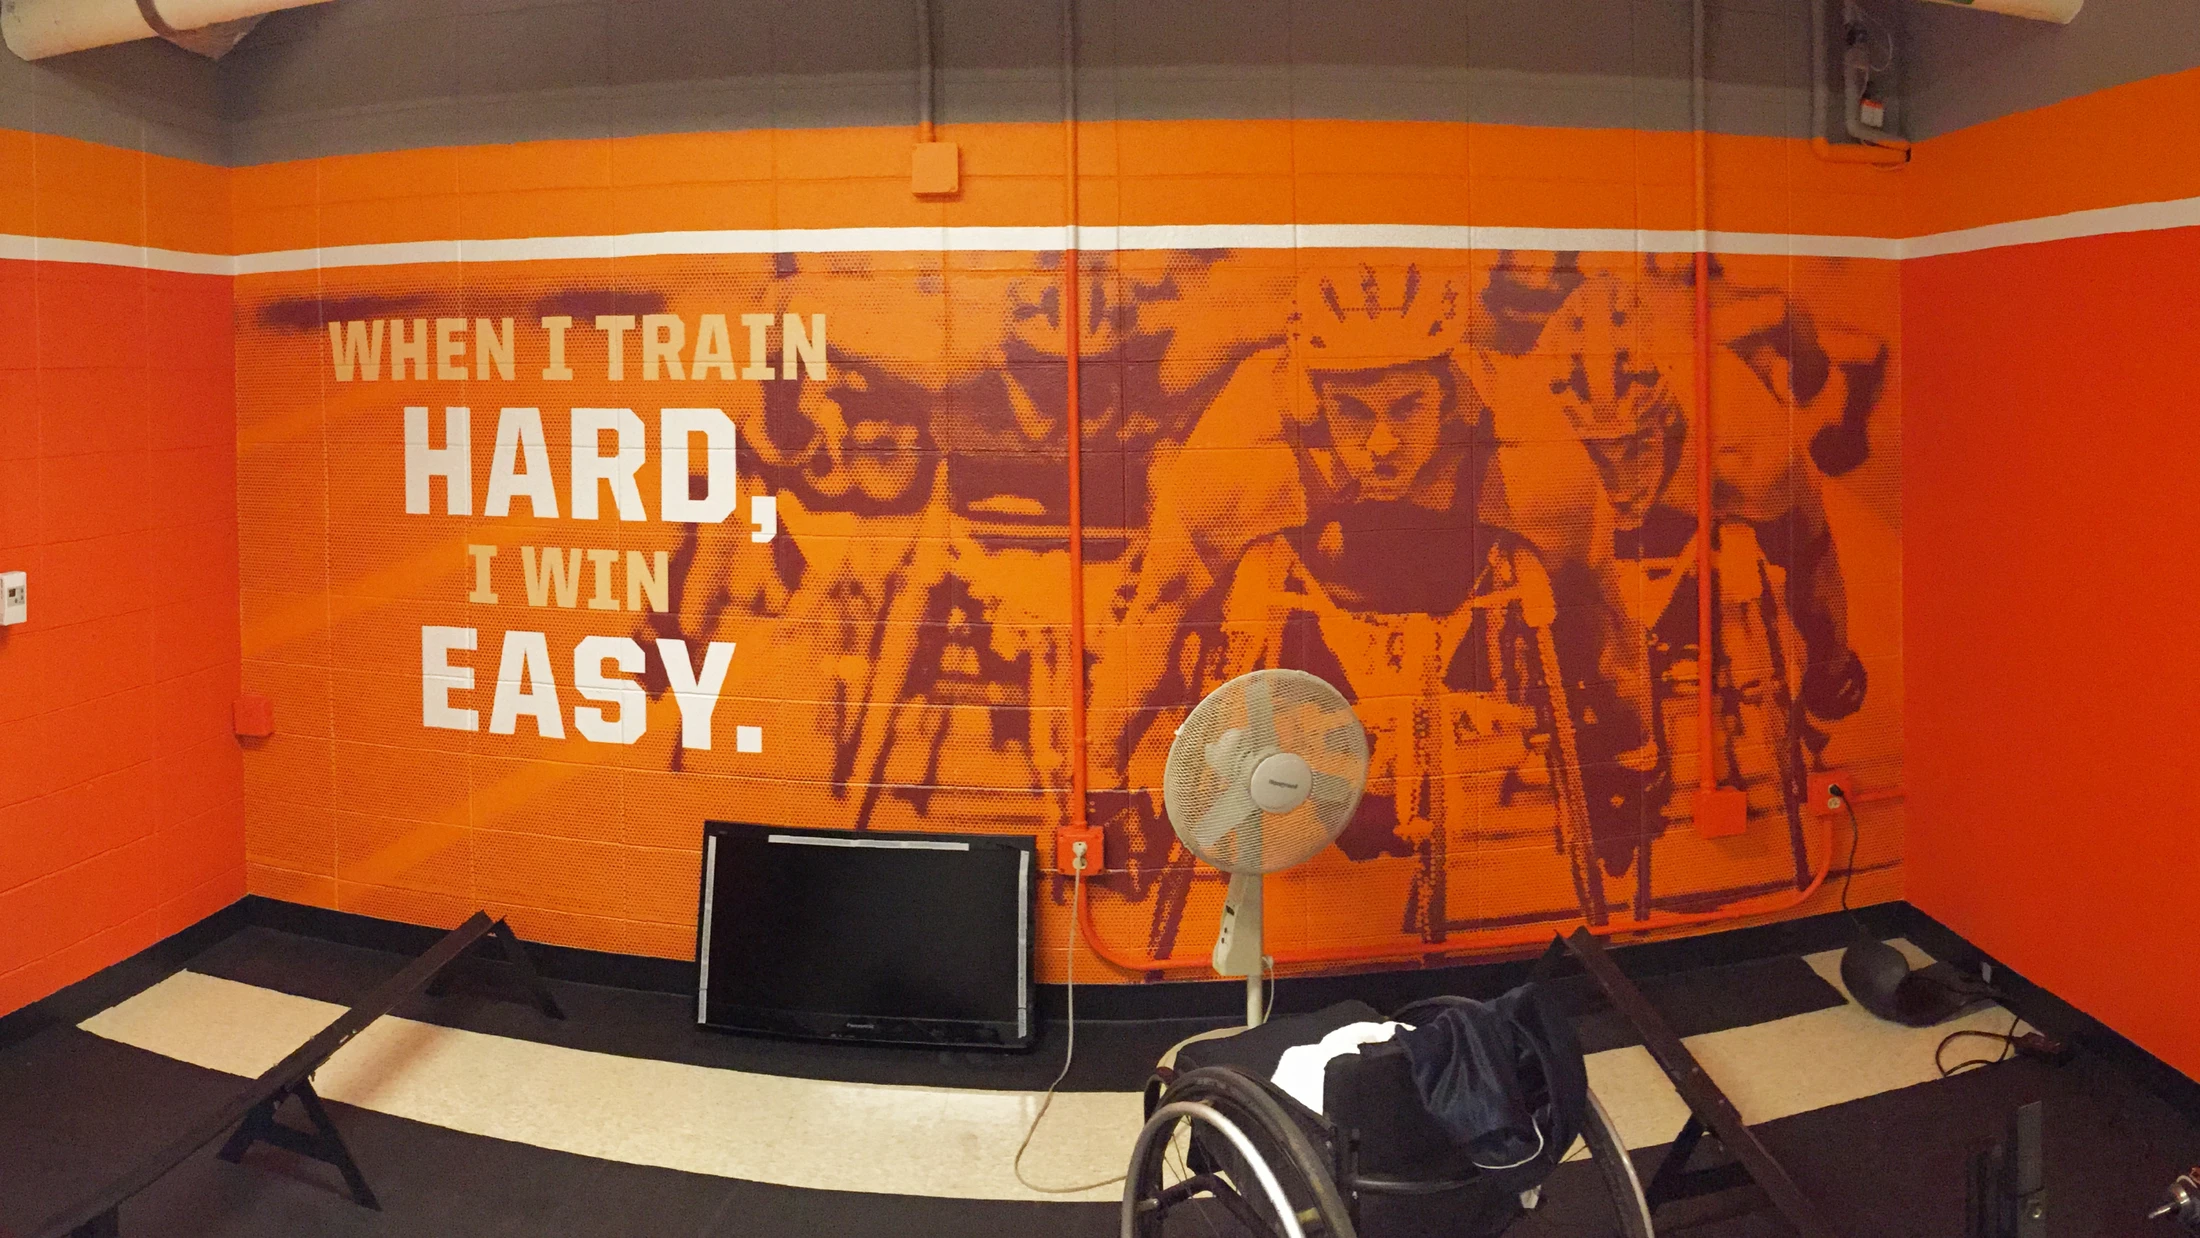 A room with a wall mural that says when it's hard, it's easy.